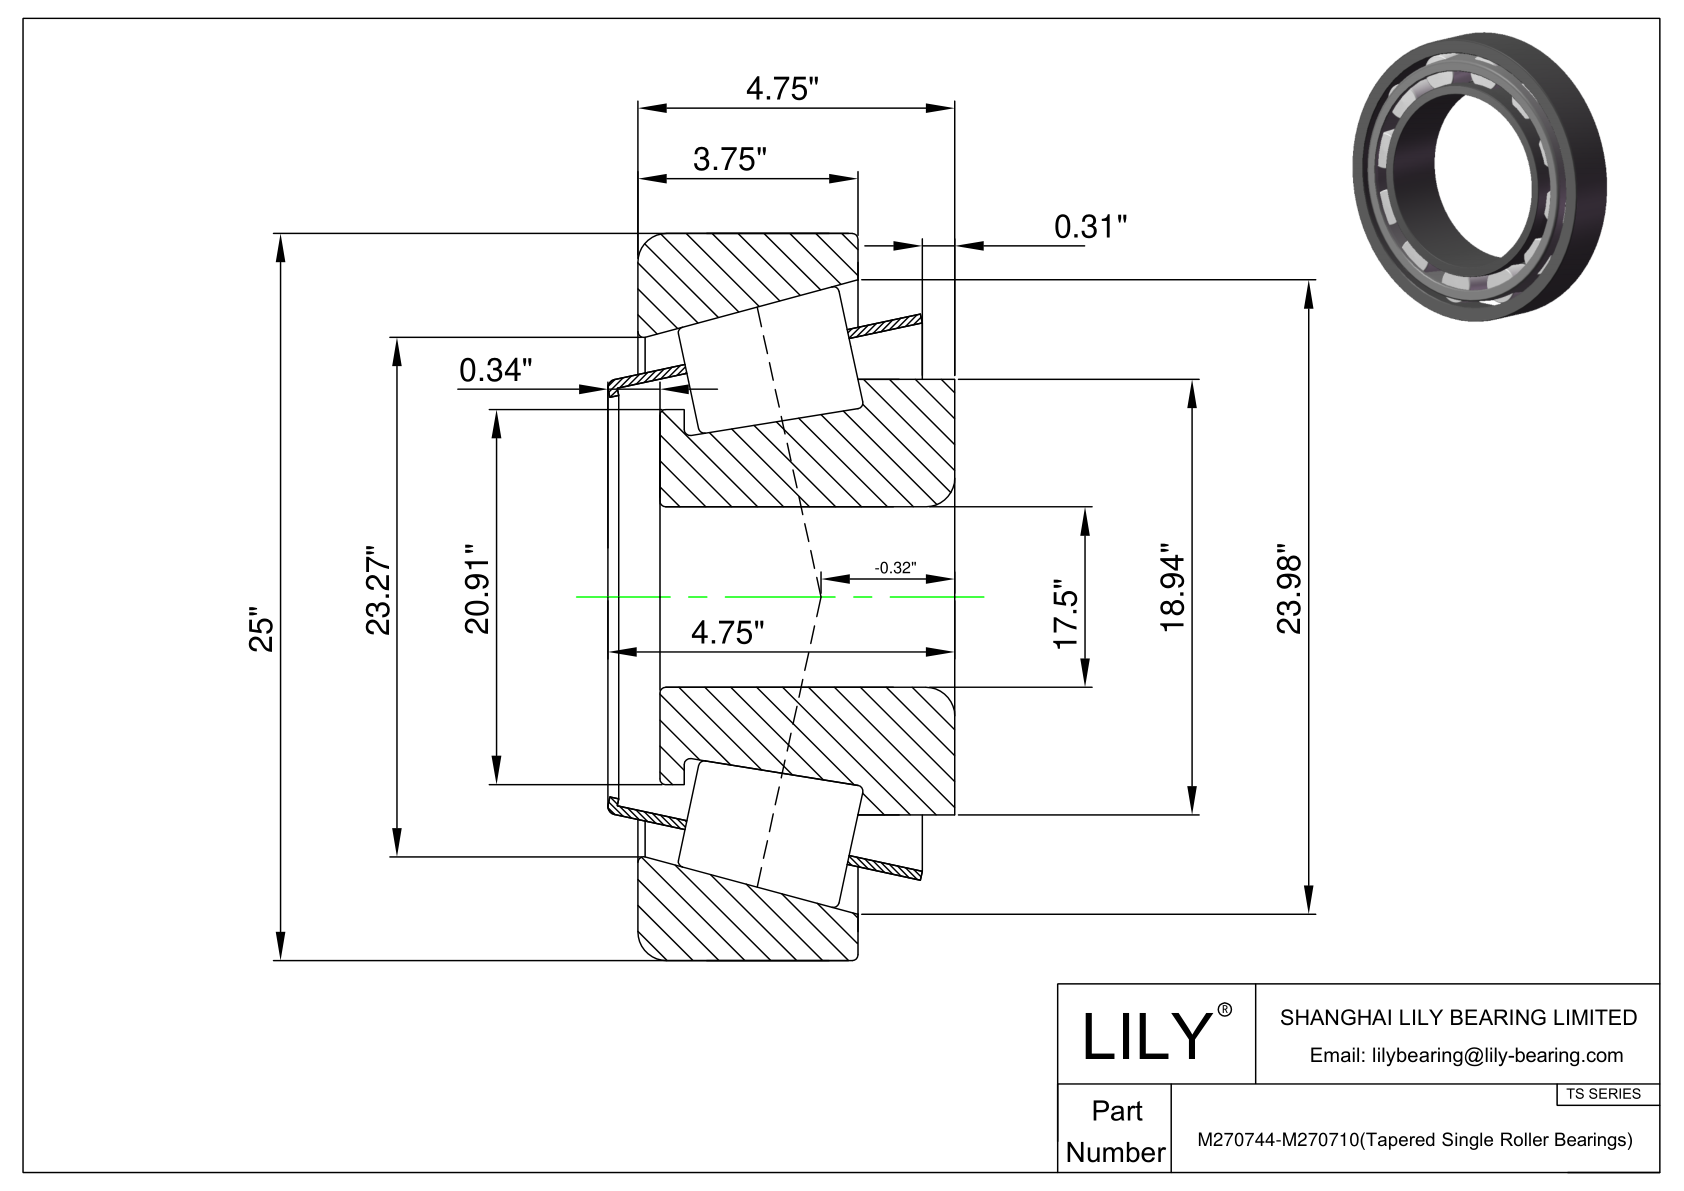 M270744-M270710 TS (Tapered Single Roller Bearings) (Imperial) cad drawing